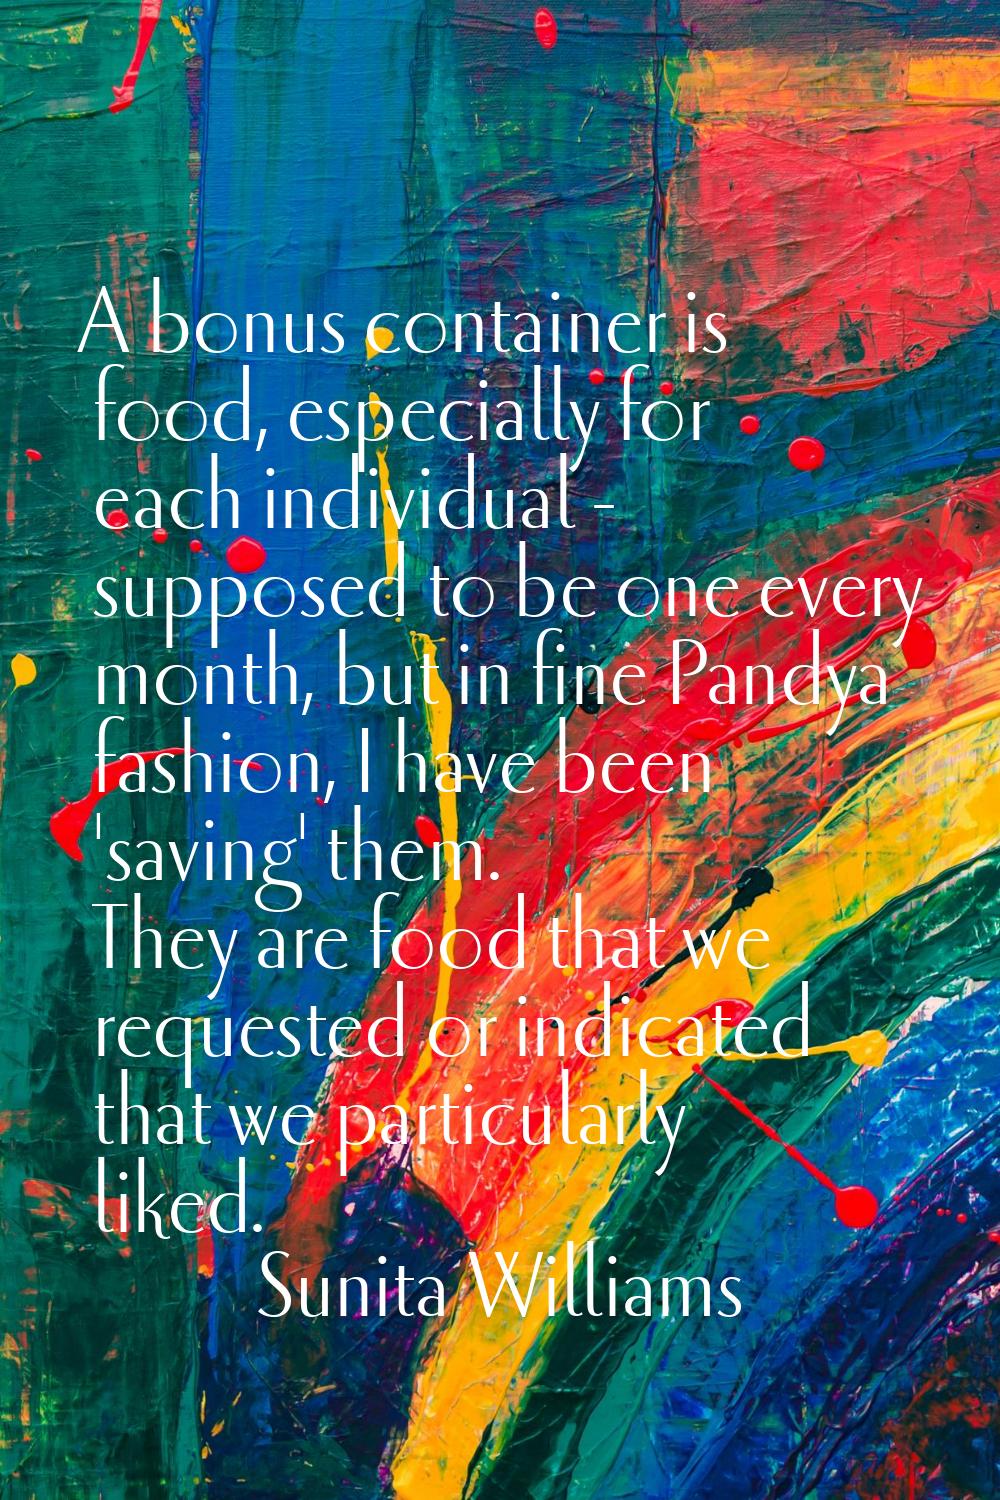 A bonus container is food, especially for each individual - supposed to be one every month, but in 